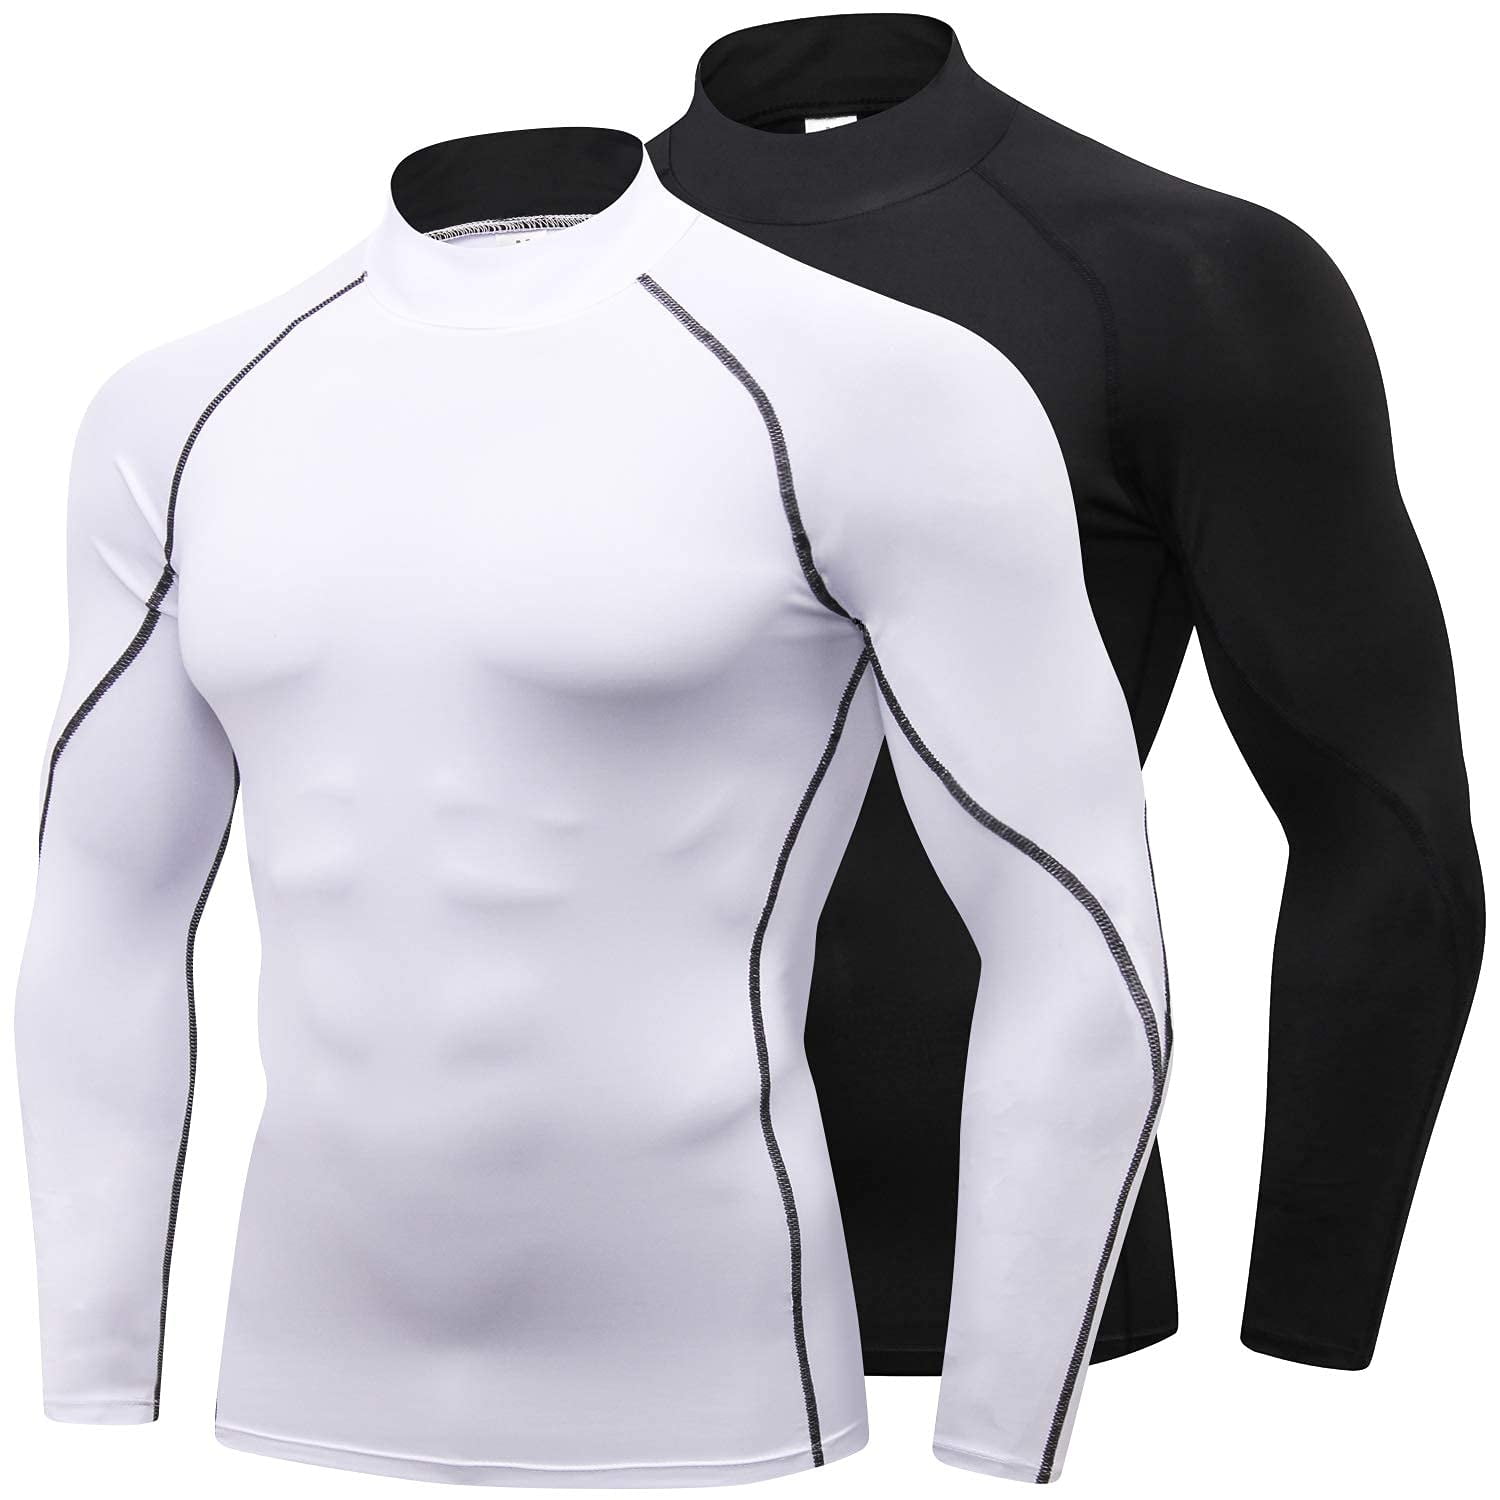 Men's Pro Performance Compression Shirt Long Sleeve Base Layer Thermal Top Mock 